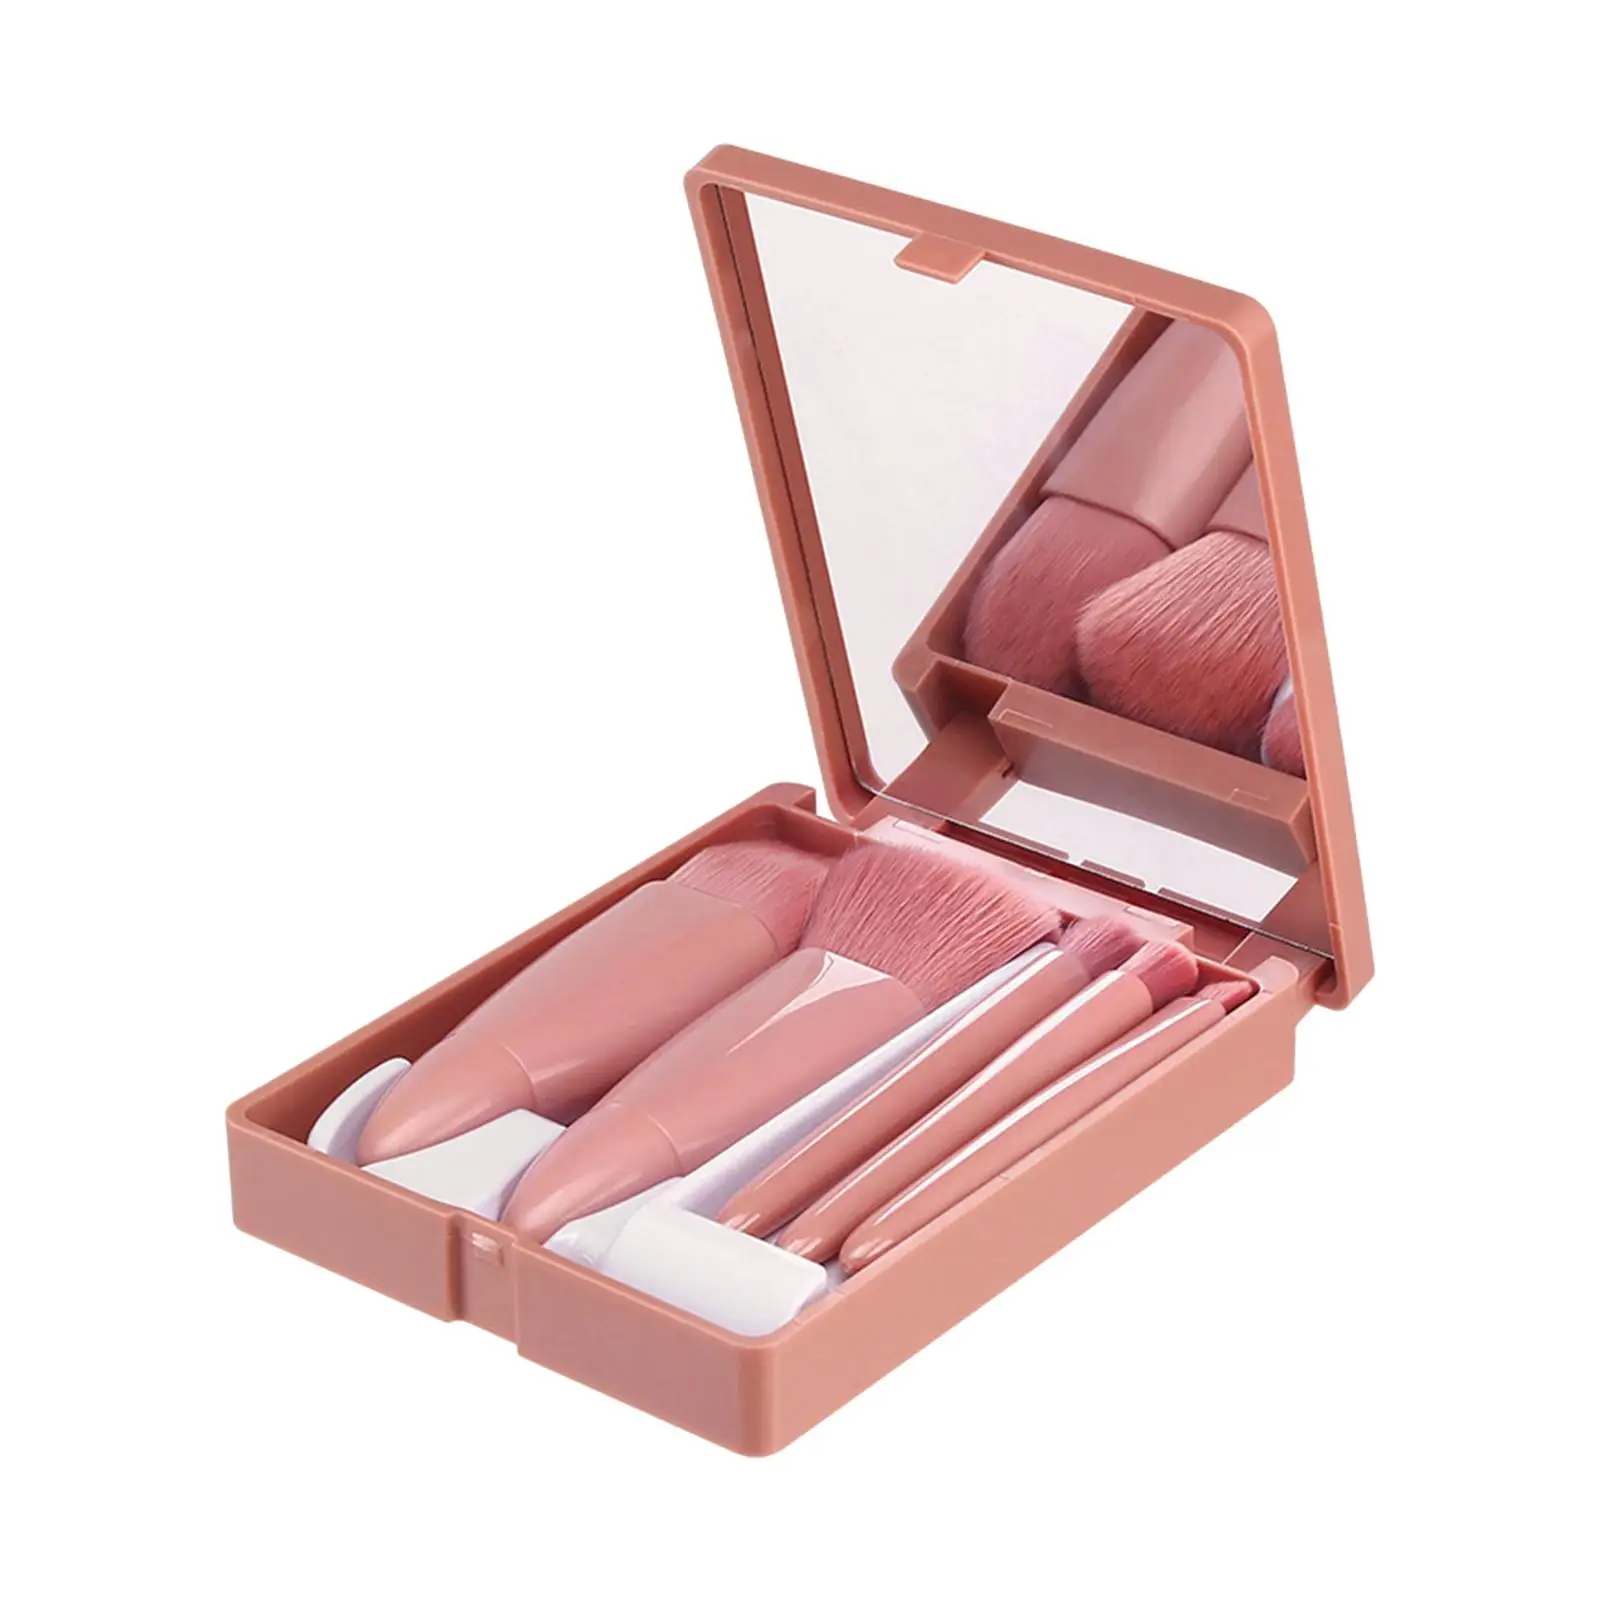 Makeup Brushes Set  Synthetic Powder Eyeshadow Eye Shadows Pink Highlight  with Case Blush Brushes for